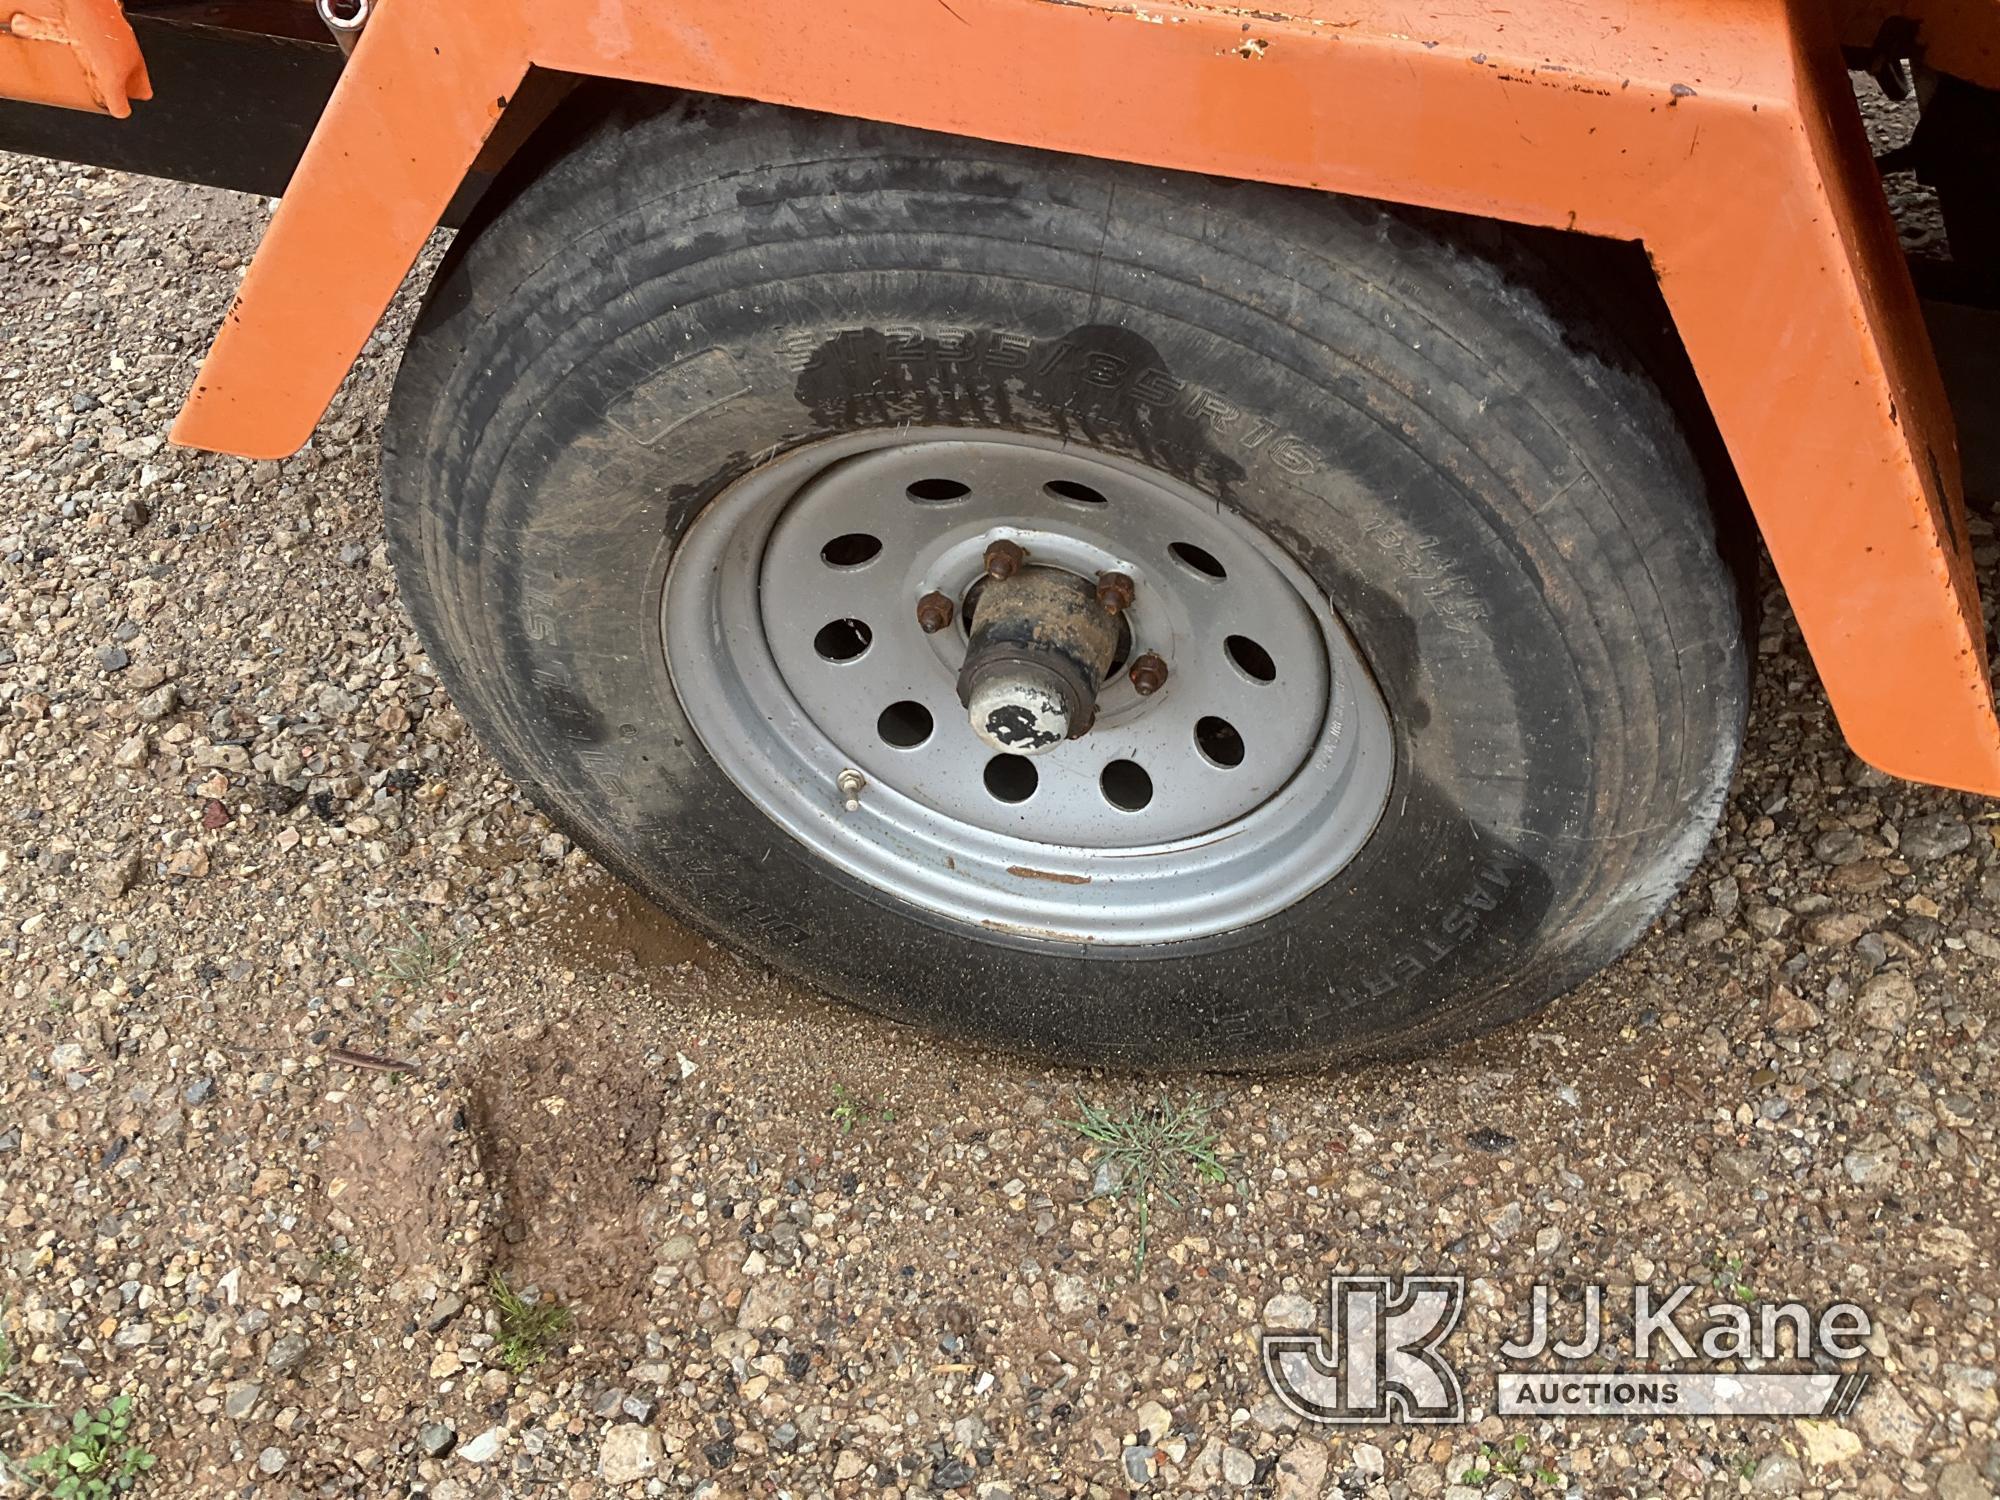 (Oklahoma City, OK) 2012 Vermeer BC1000XL Chipper (12in Drum) Not Running, Condition Unknown, Parts